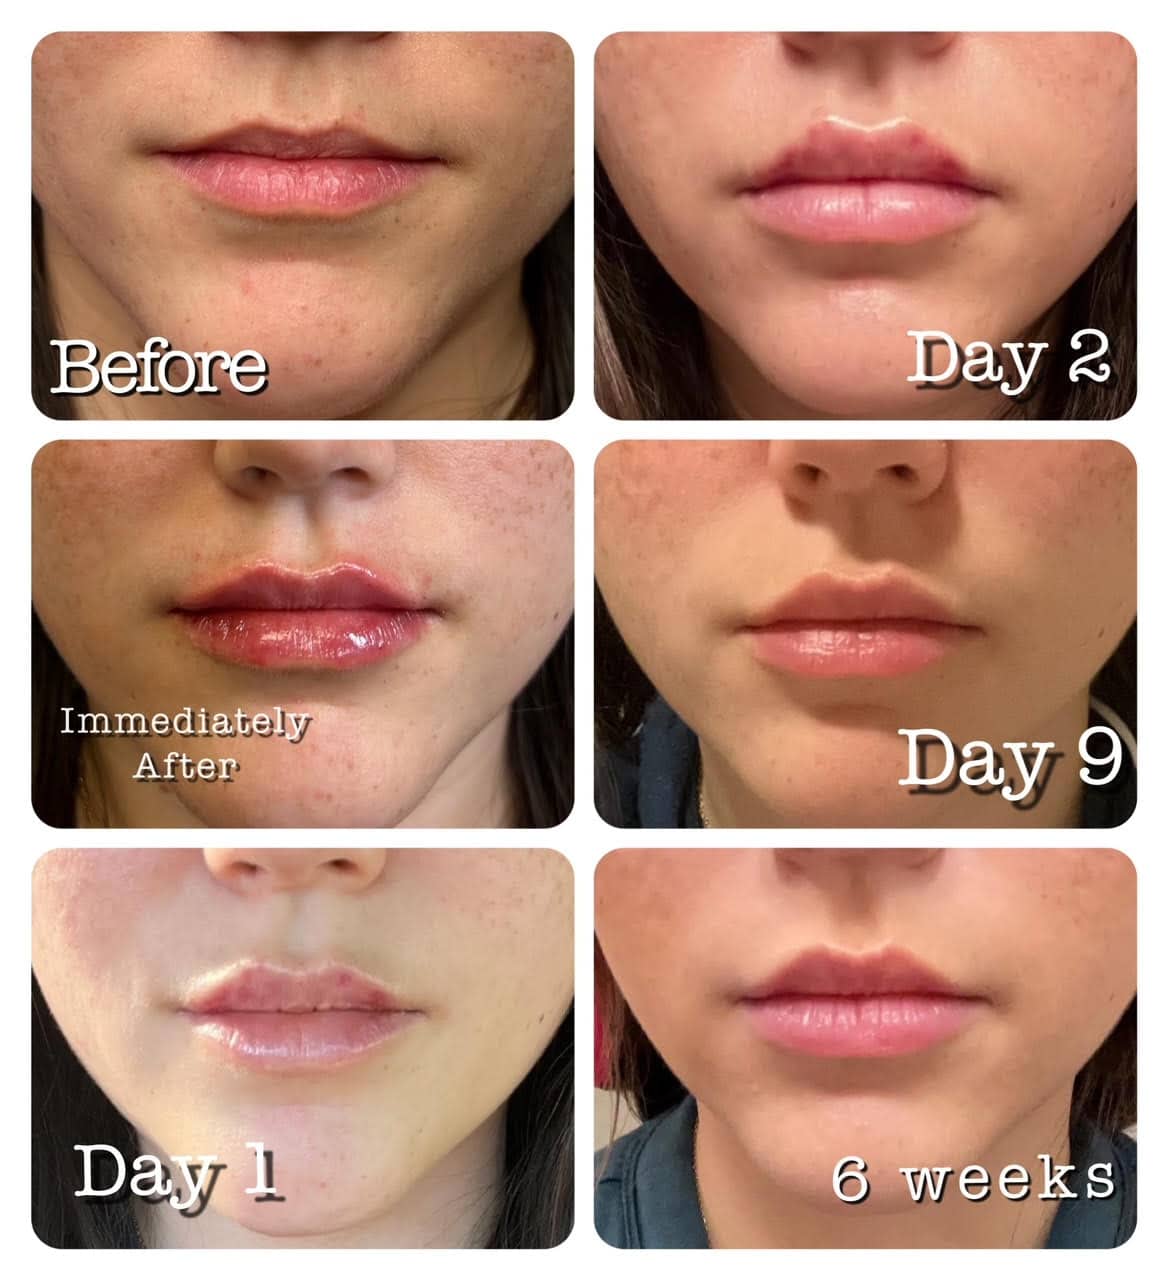 Lip filler swelling stages before and after across a 6-week period